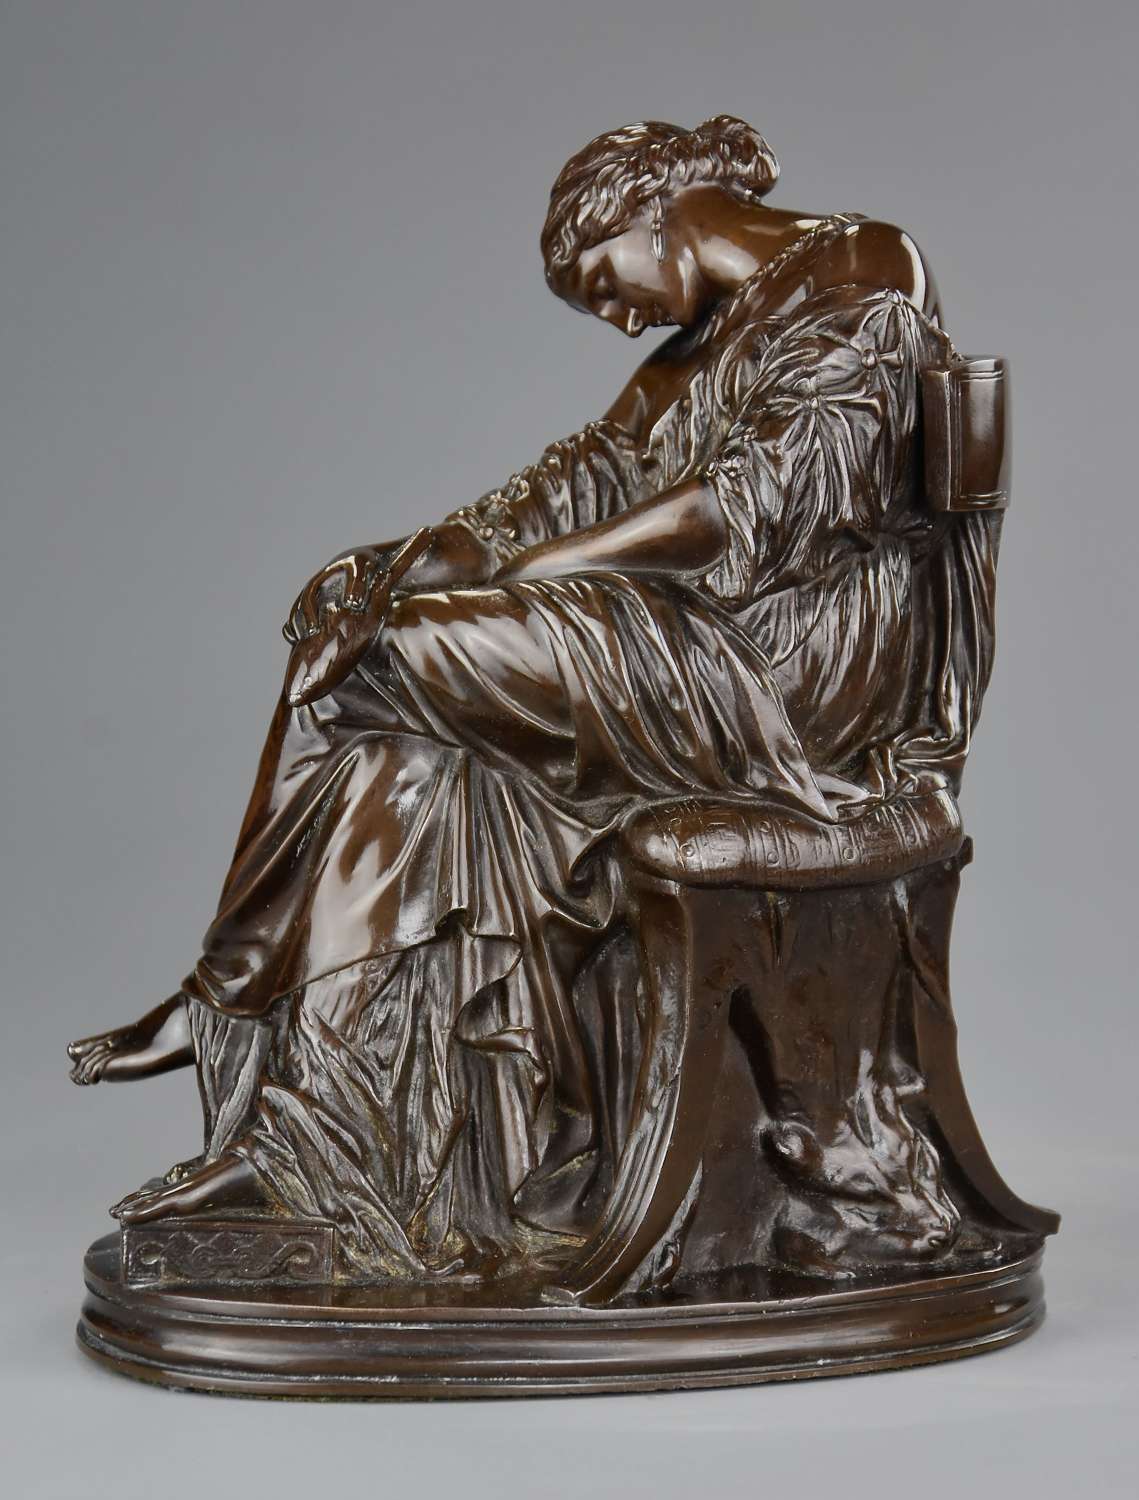 Fine quality French bronze sculpture of ‘Penelope’ by Cavelier